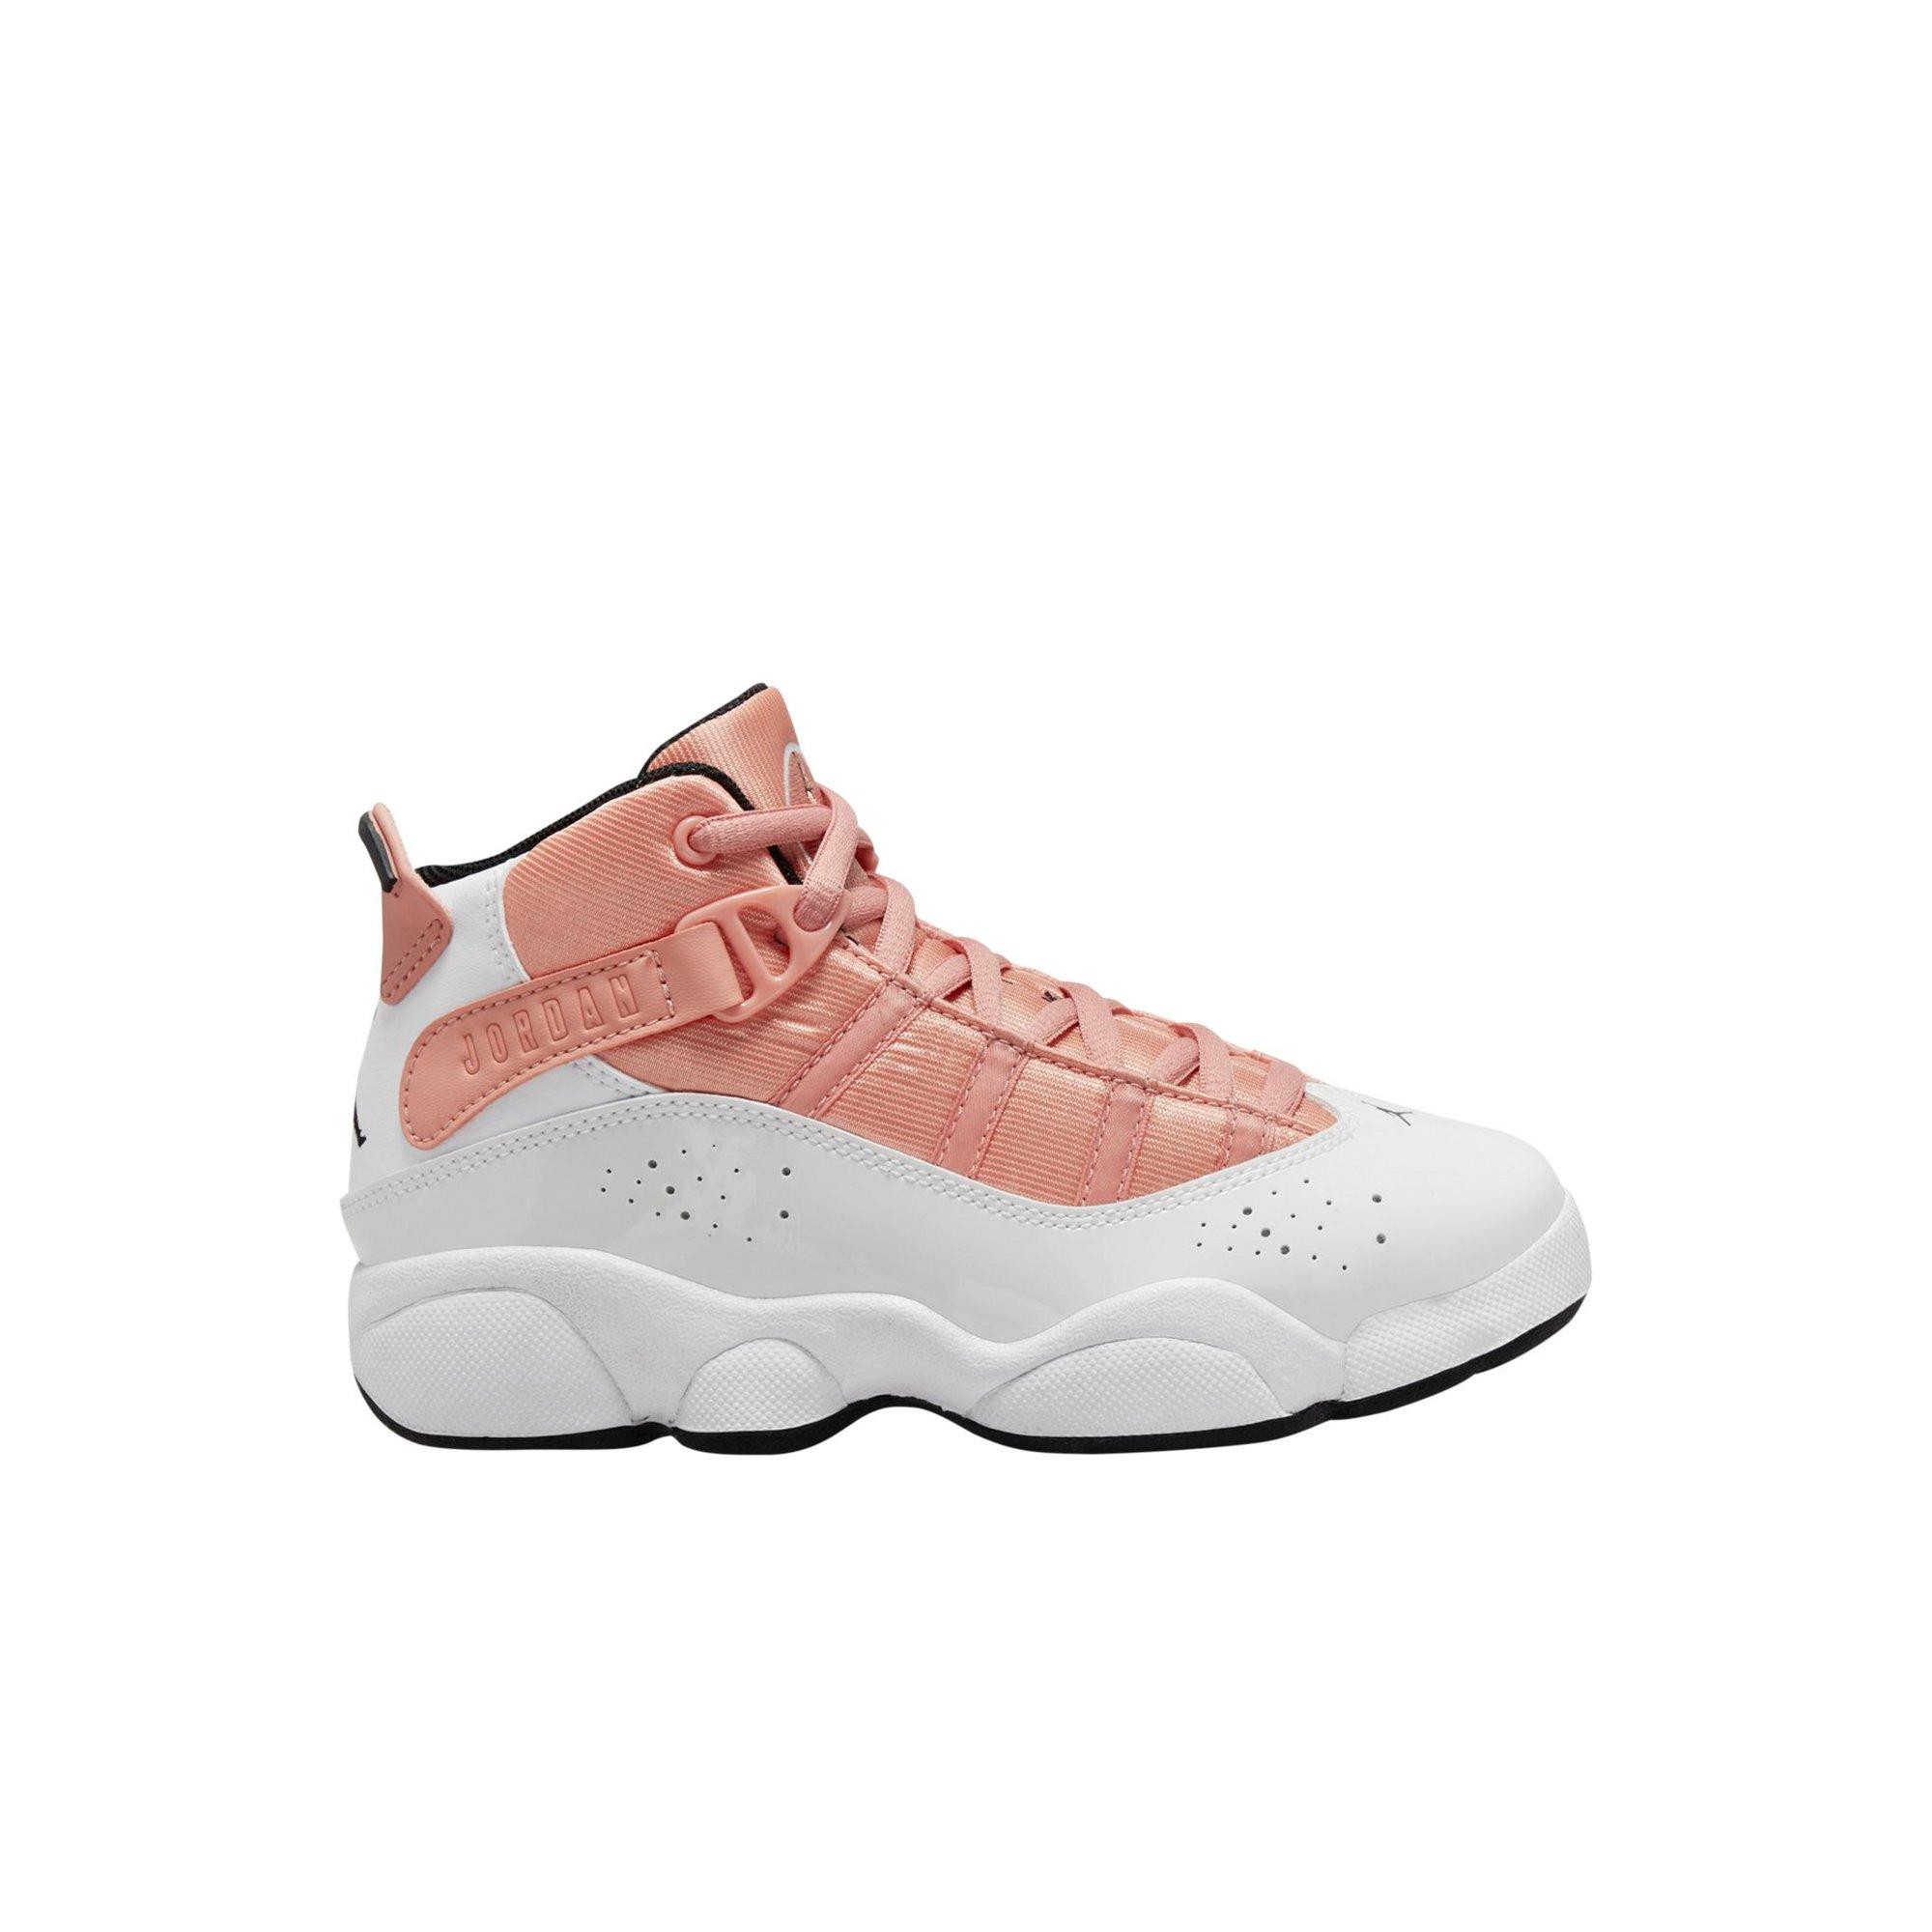 all white and pink jordans